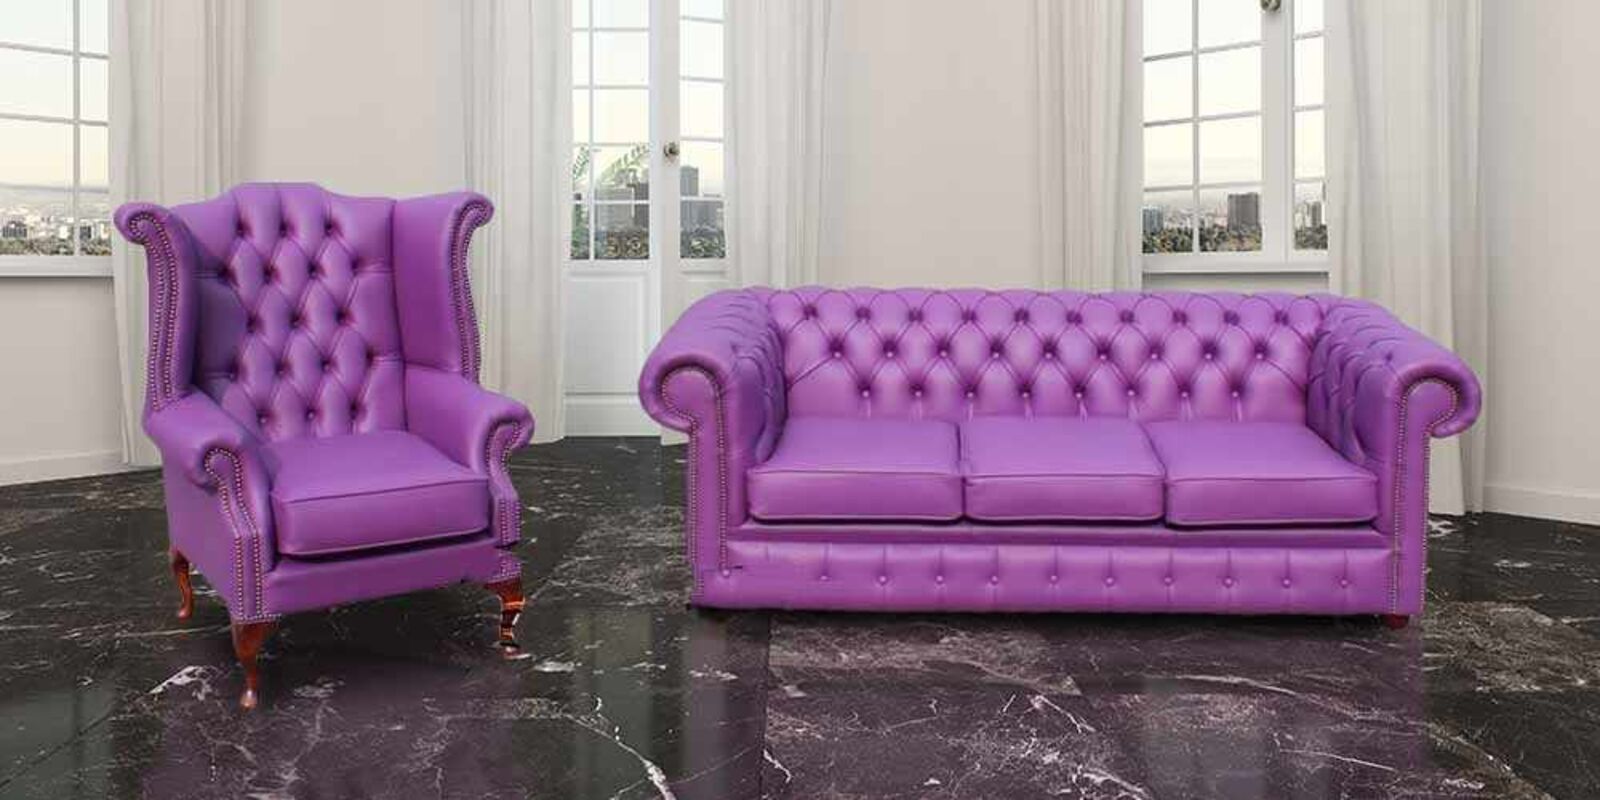 Product photograph of Buy Bespoke Leather Sofa Suite Chesterfield Furniture Online Designersofas4u from Designer Sofas 4U